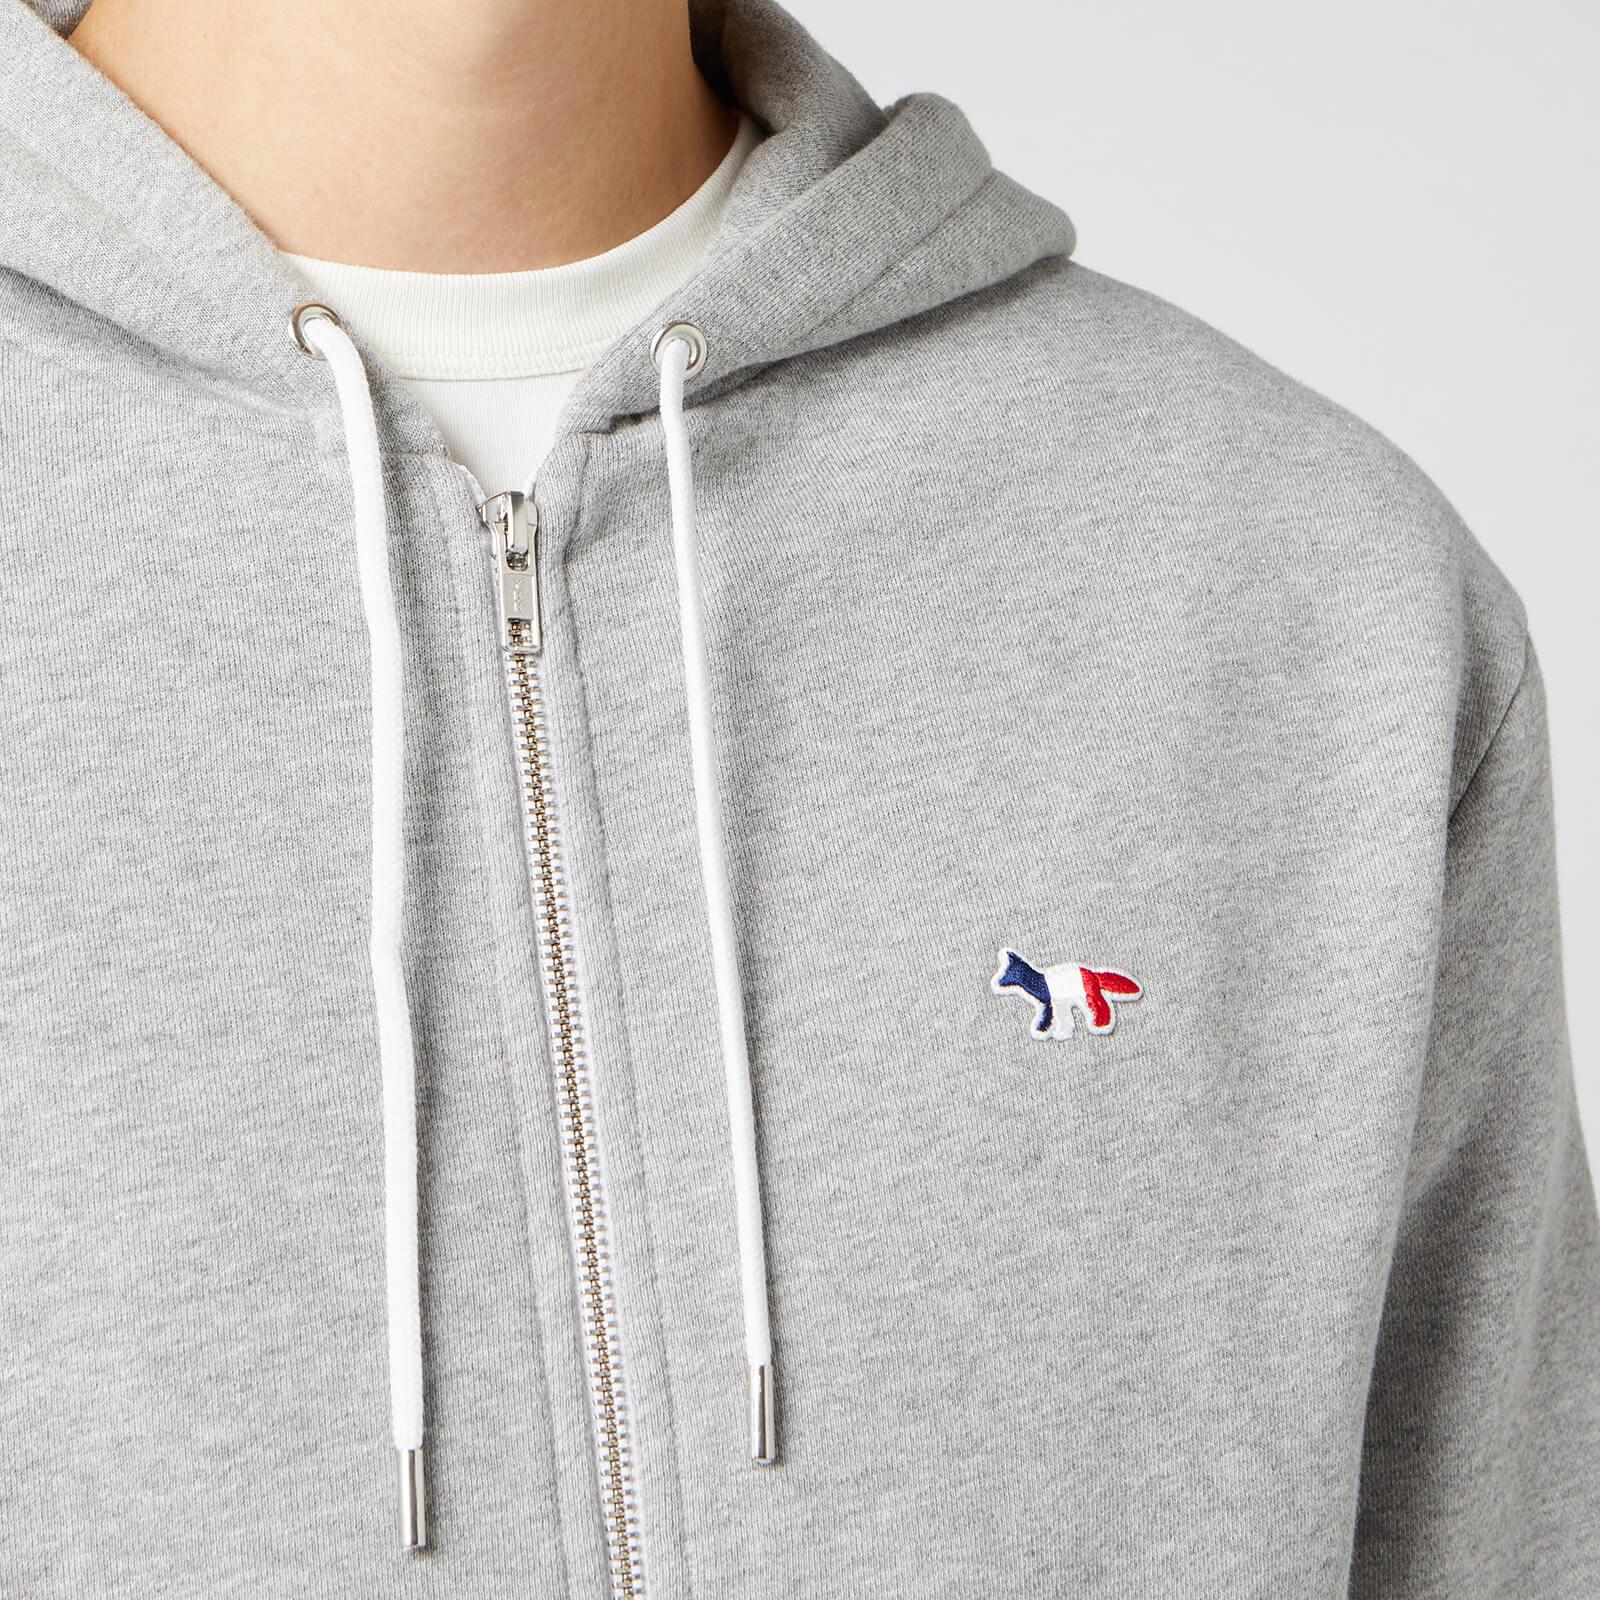 Maison Kitsuné Zip Hoodie Tricolor Fox Patch in Grey (Gray) for 